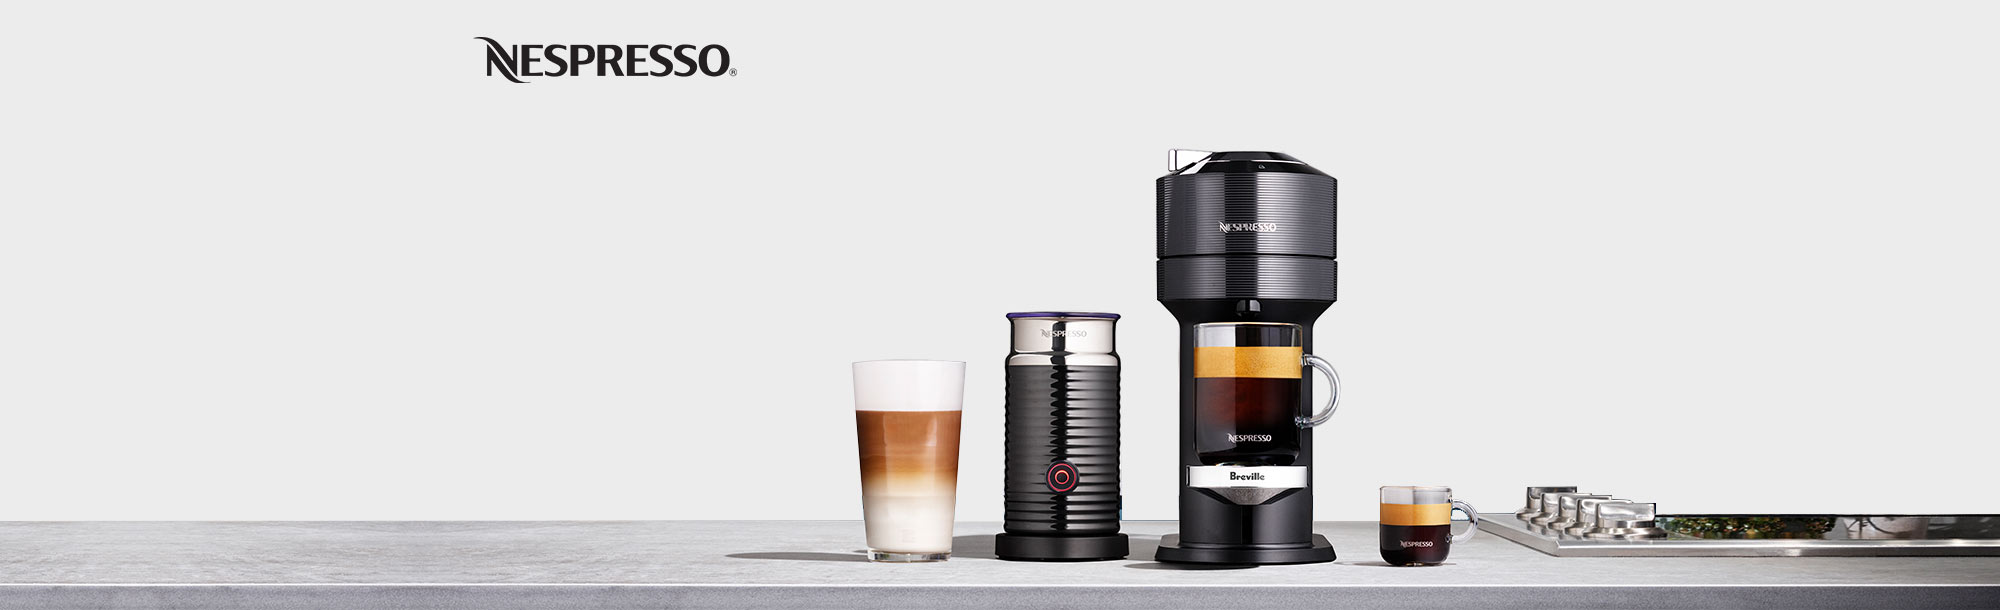 Kitchen counter with a coffee maker, milk frother, cup of espresso and coffee drink